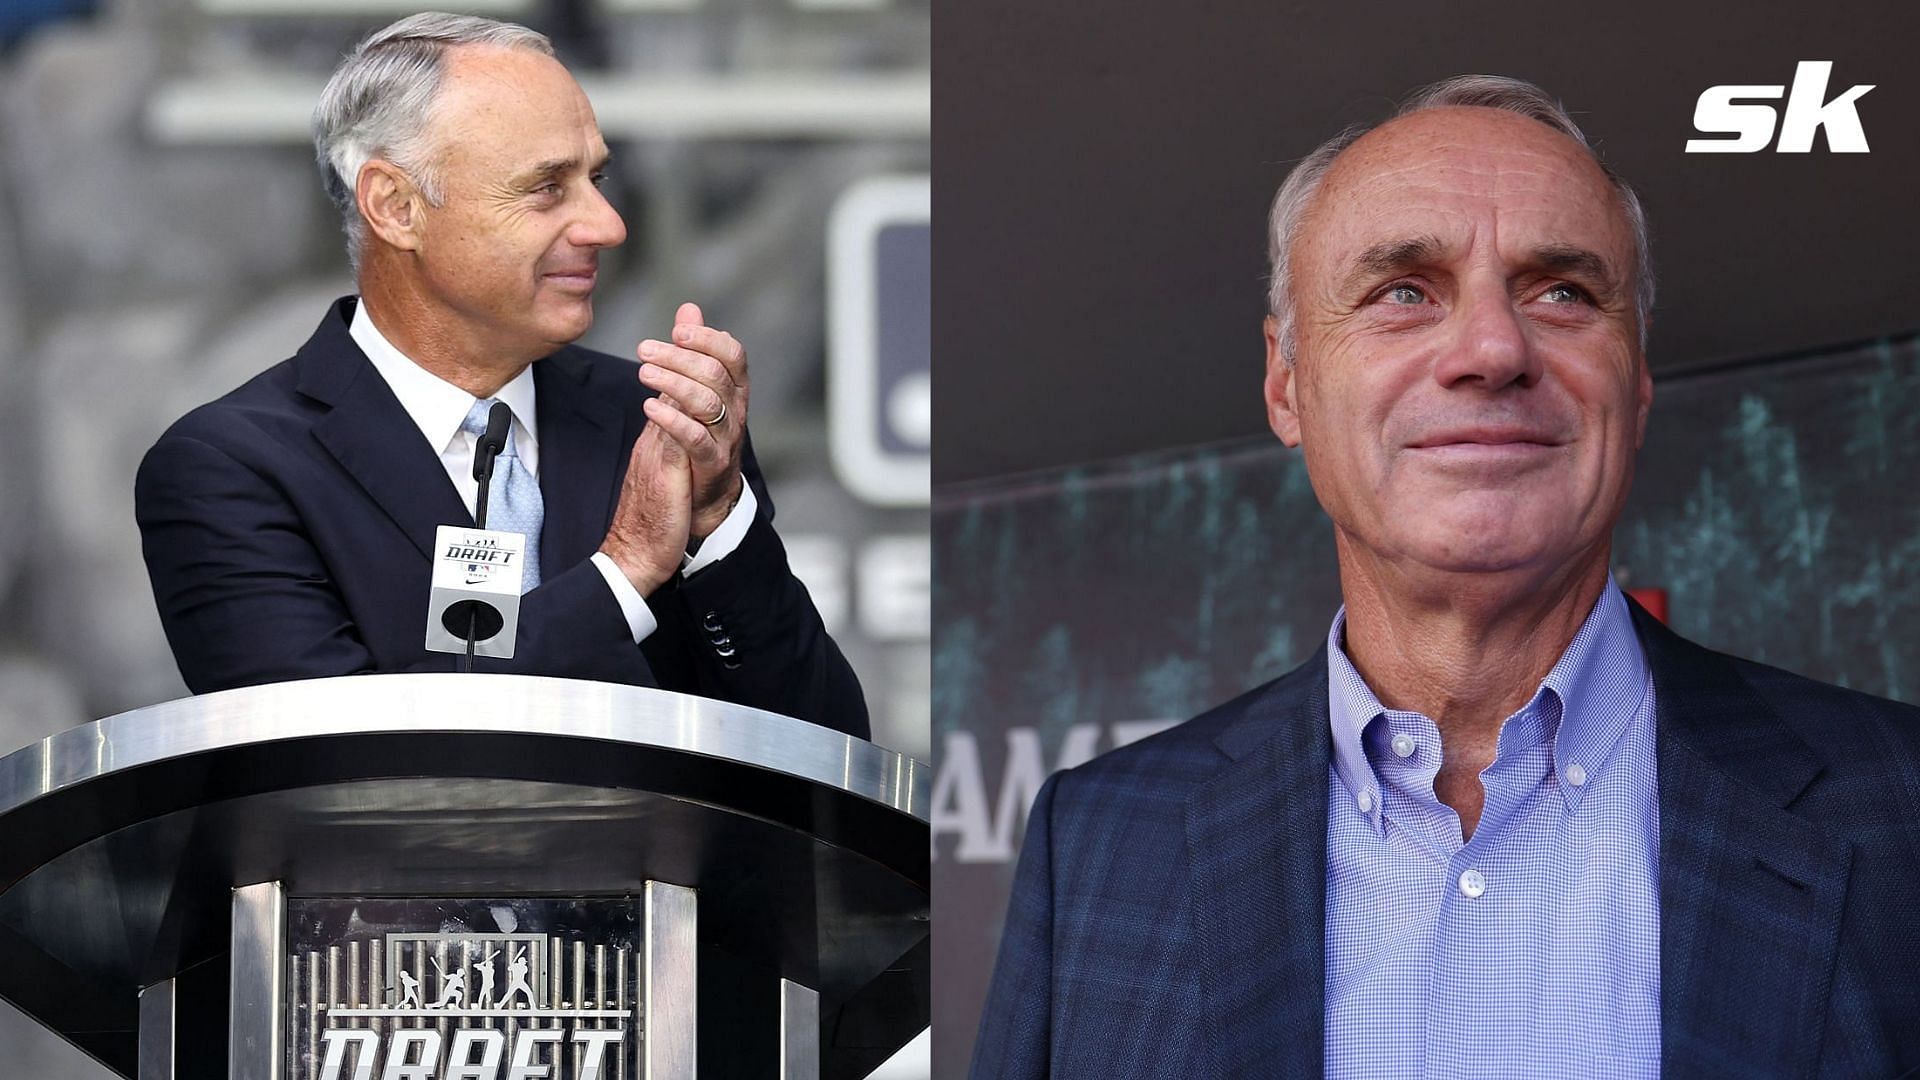 MLB Commissioner Rob Manfred to step down at end of current term in 2029